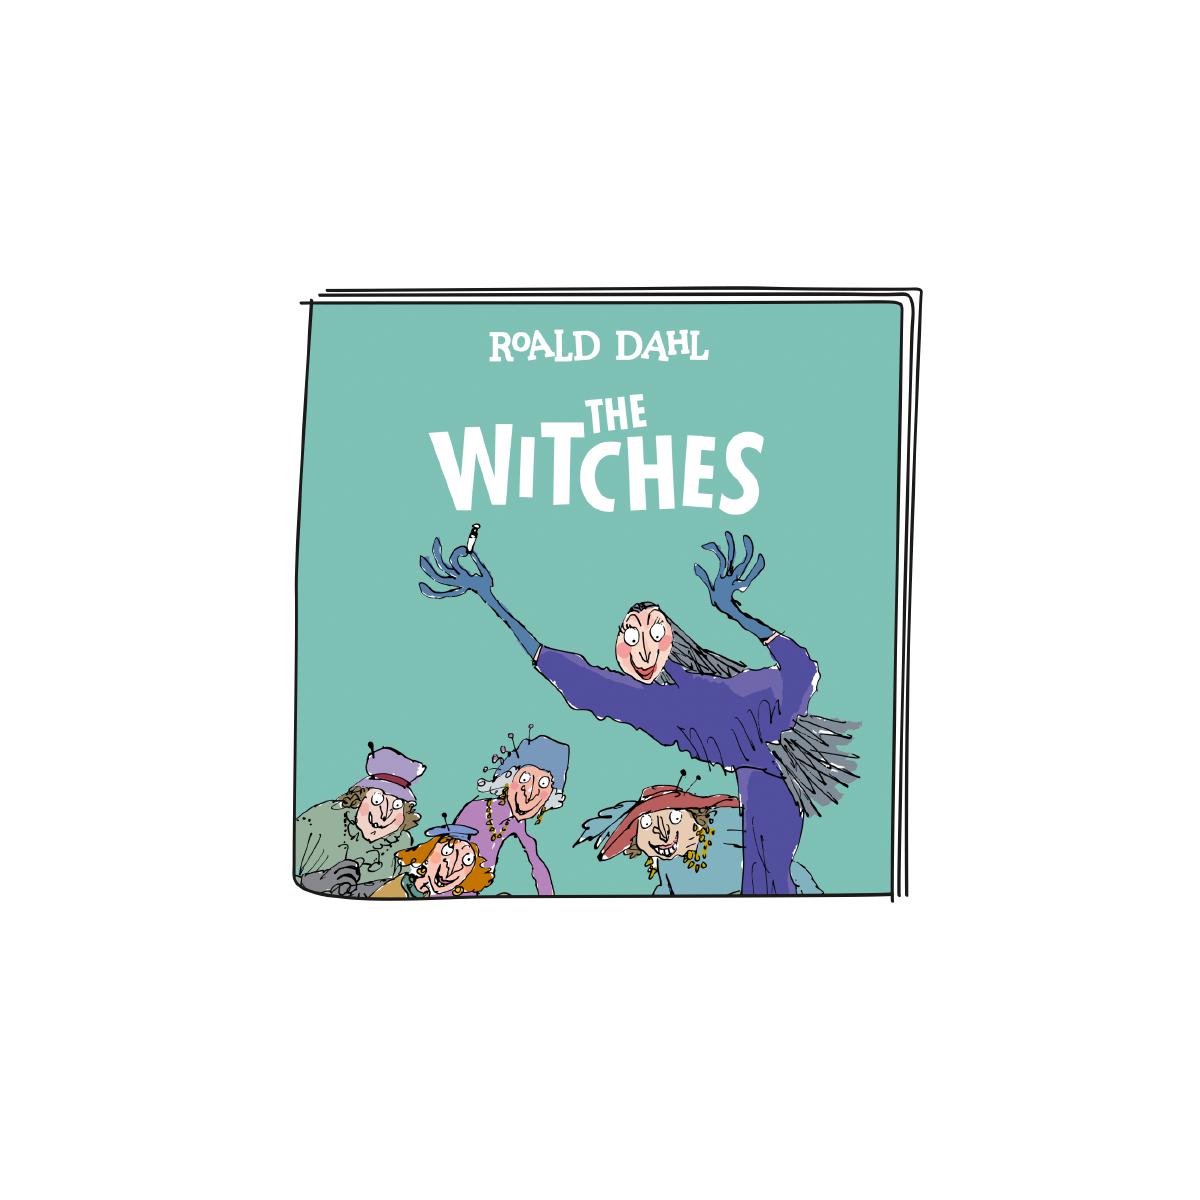 Tonies Roald Dahl The Witches - Audio Character for use with Toniebox Player